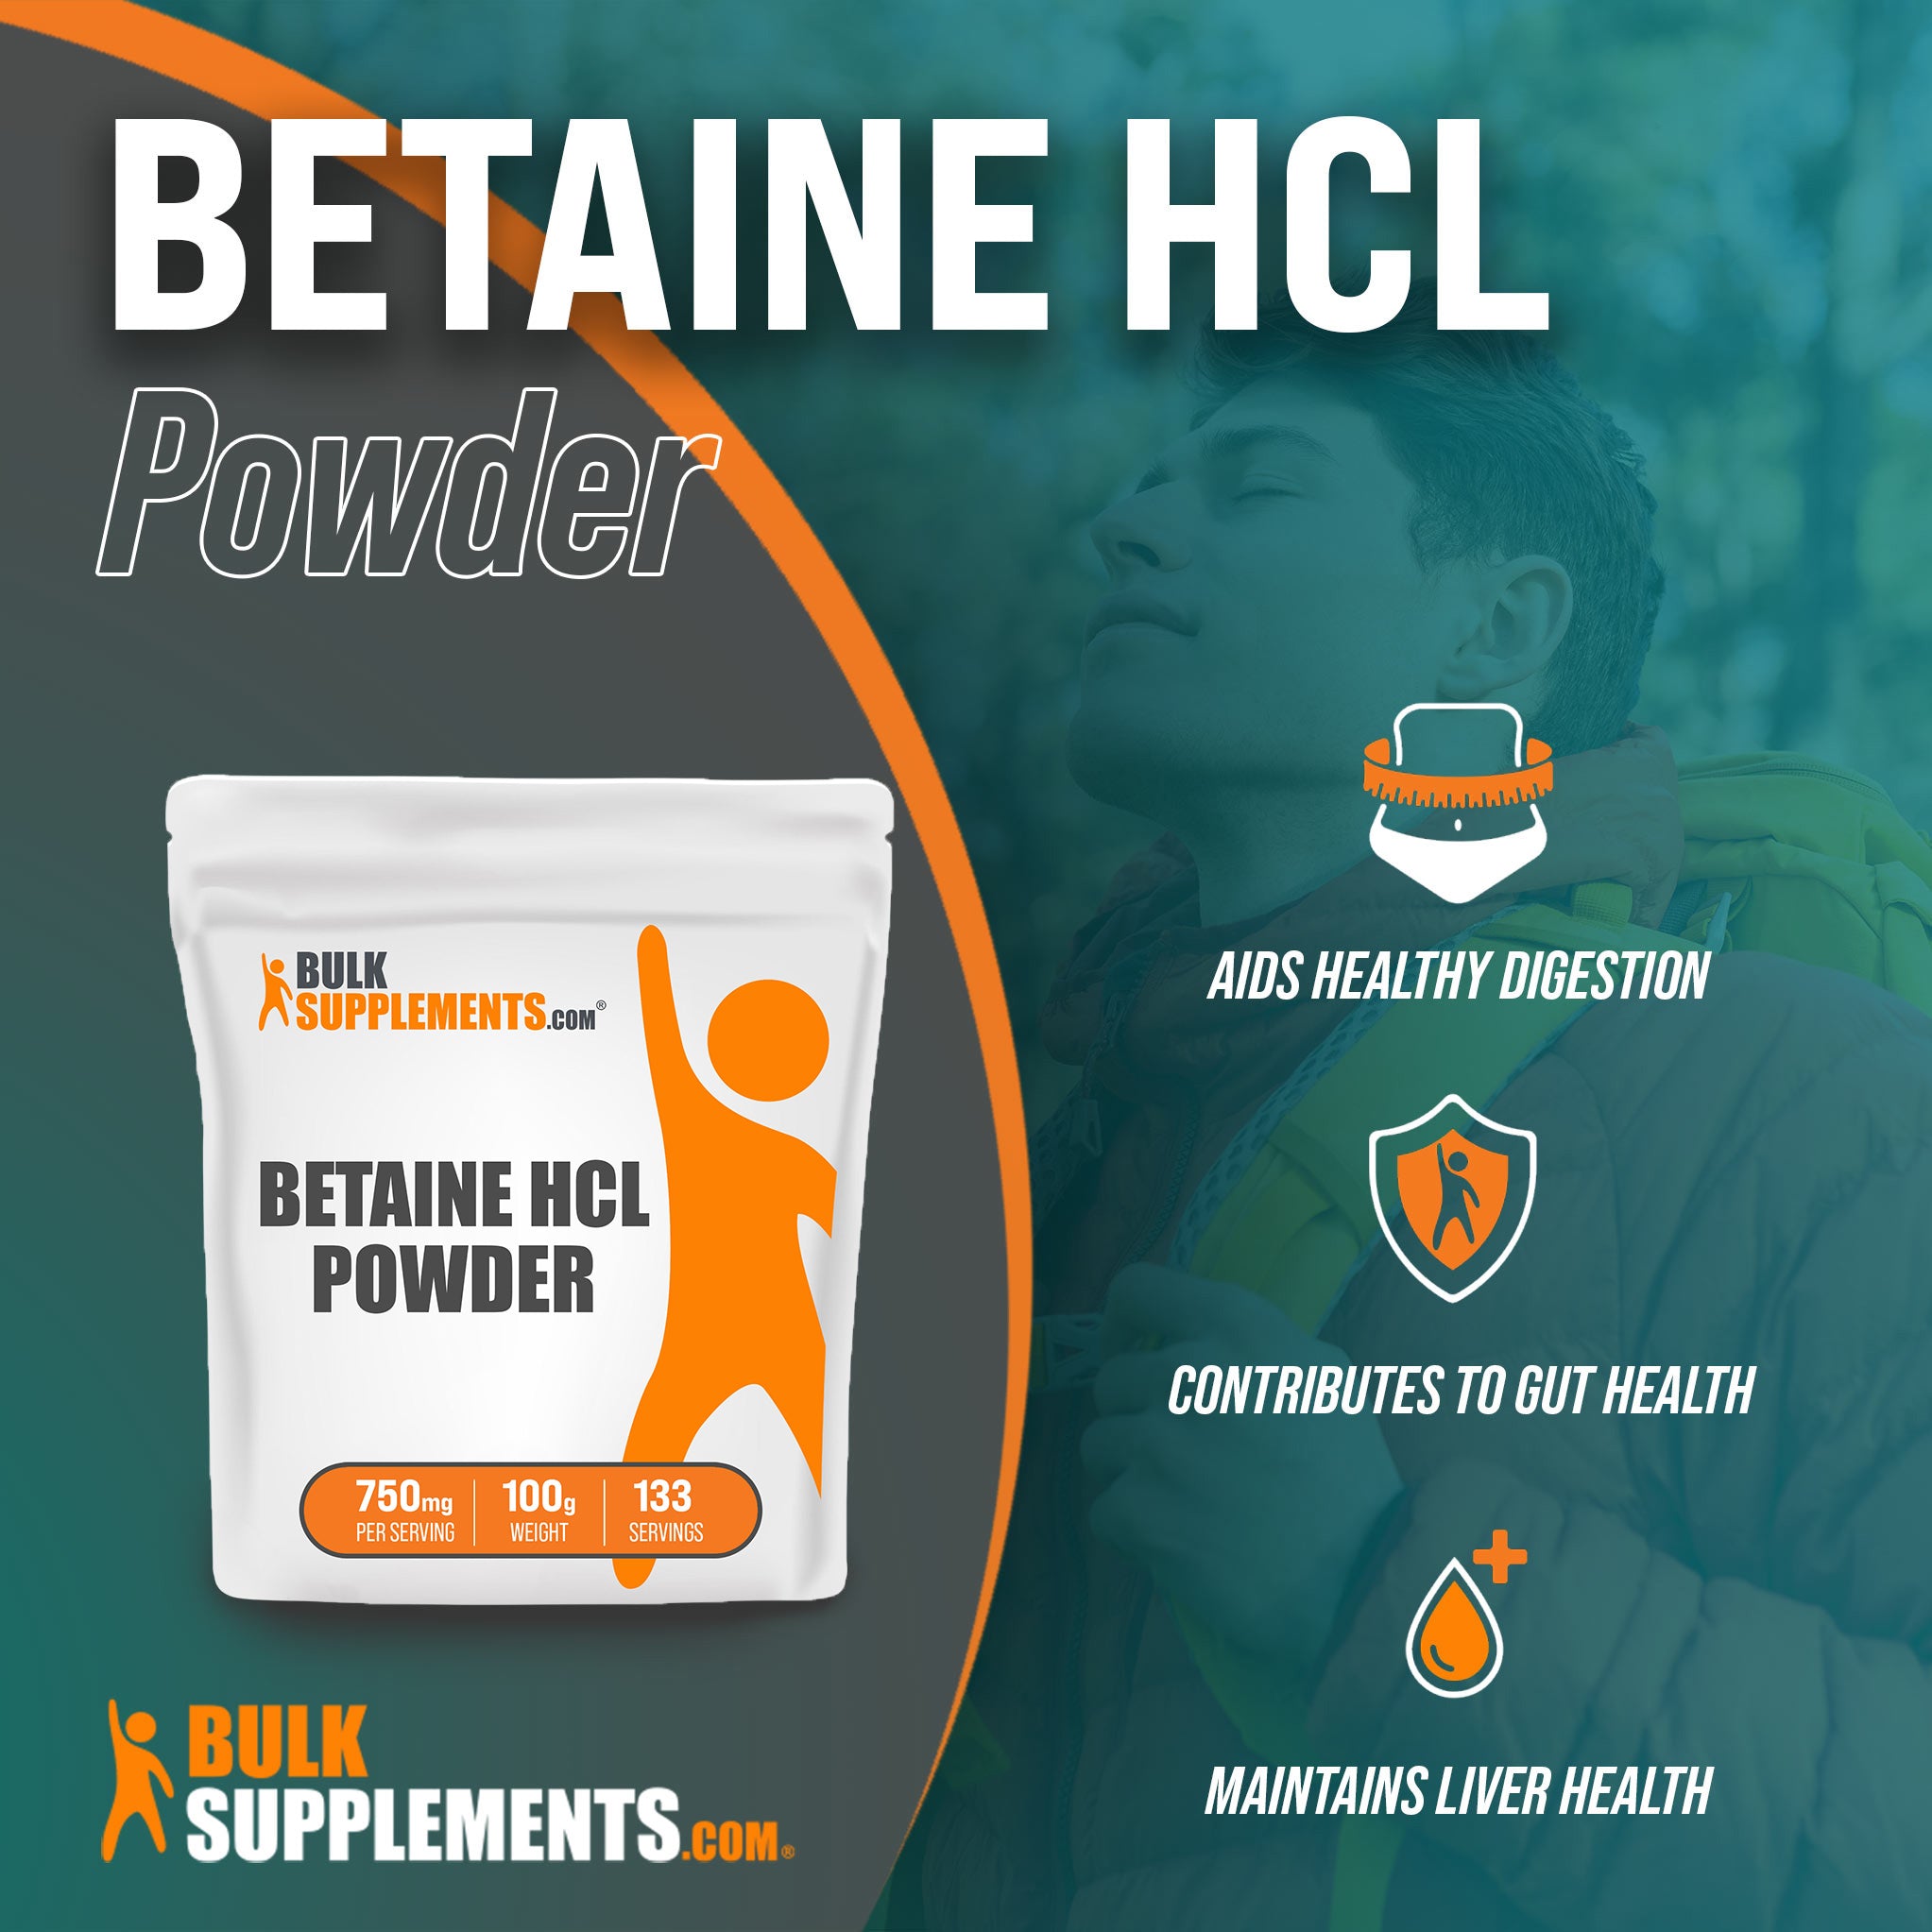 Betaine HCl 100g contains digestive enzymes